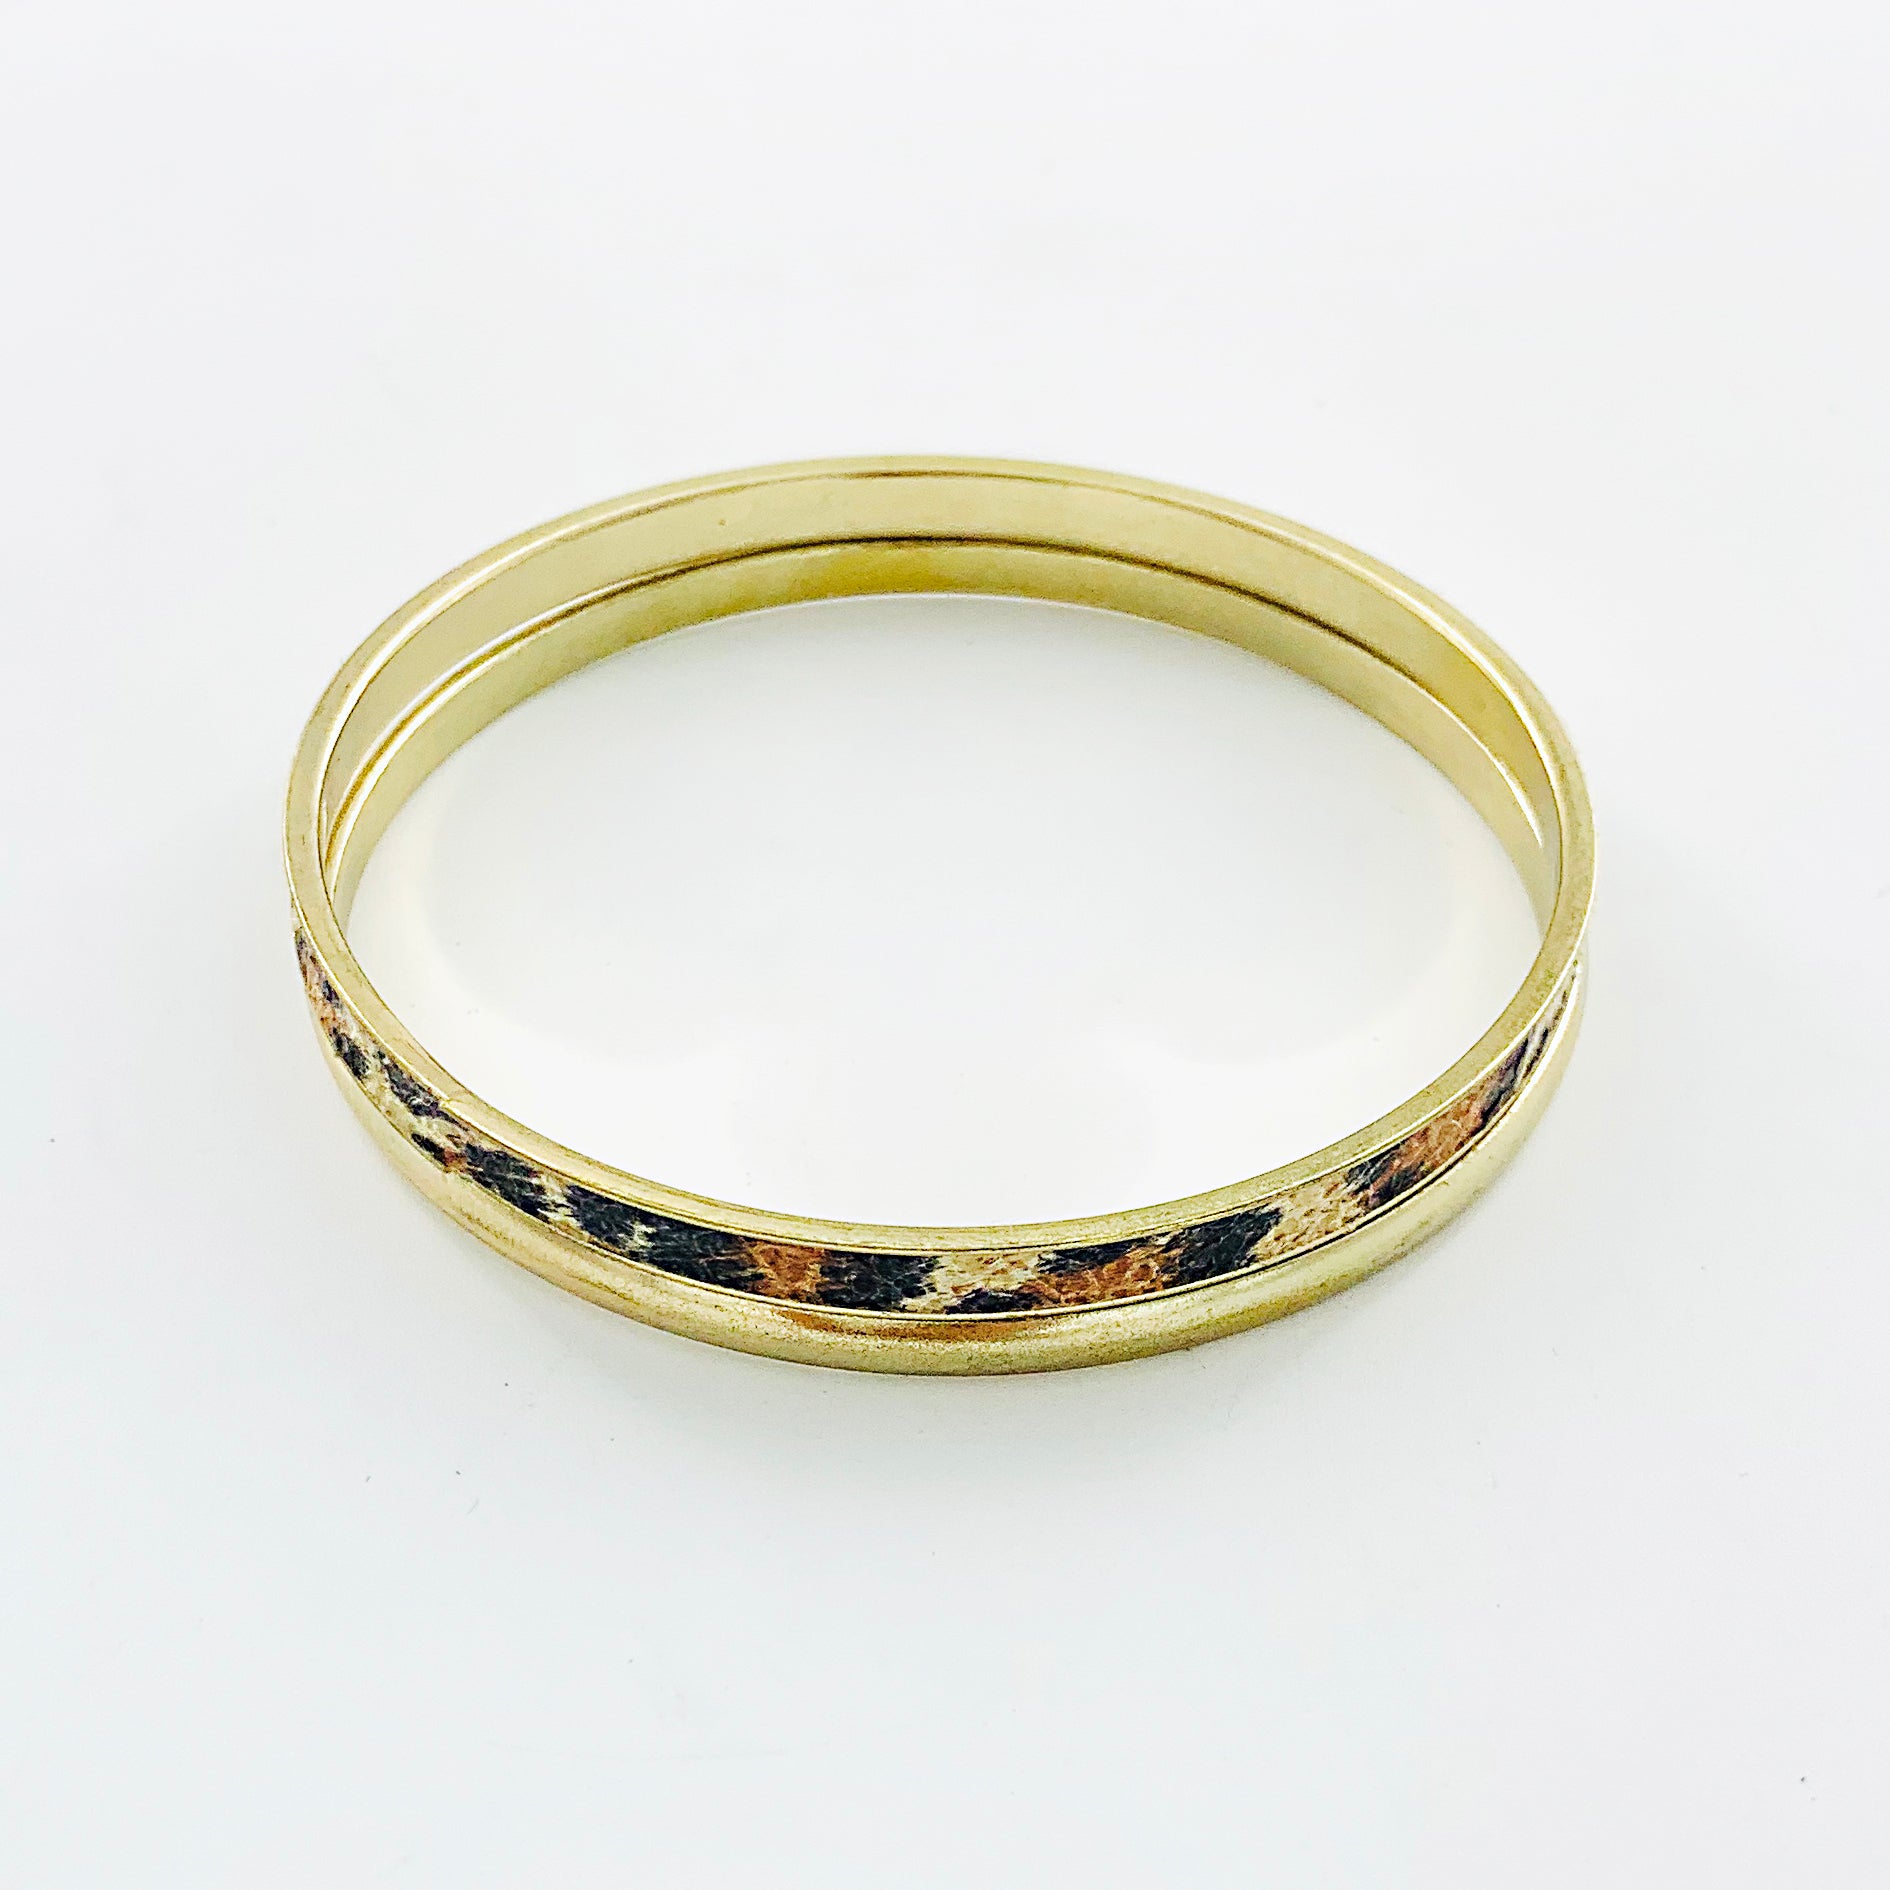 Leopard-printed and gold bangles